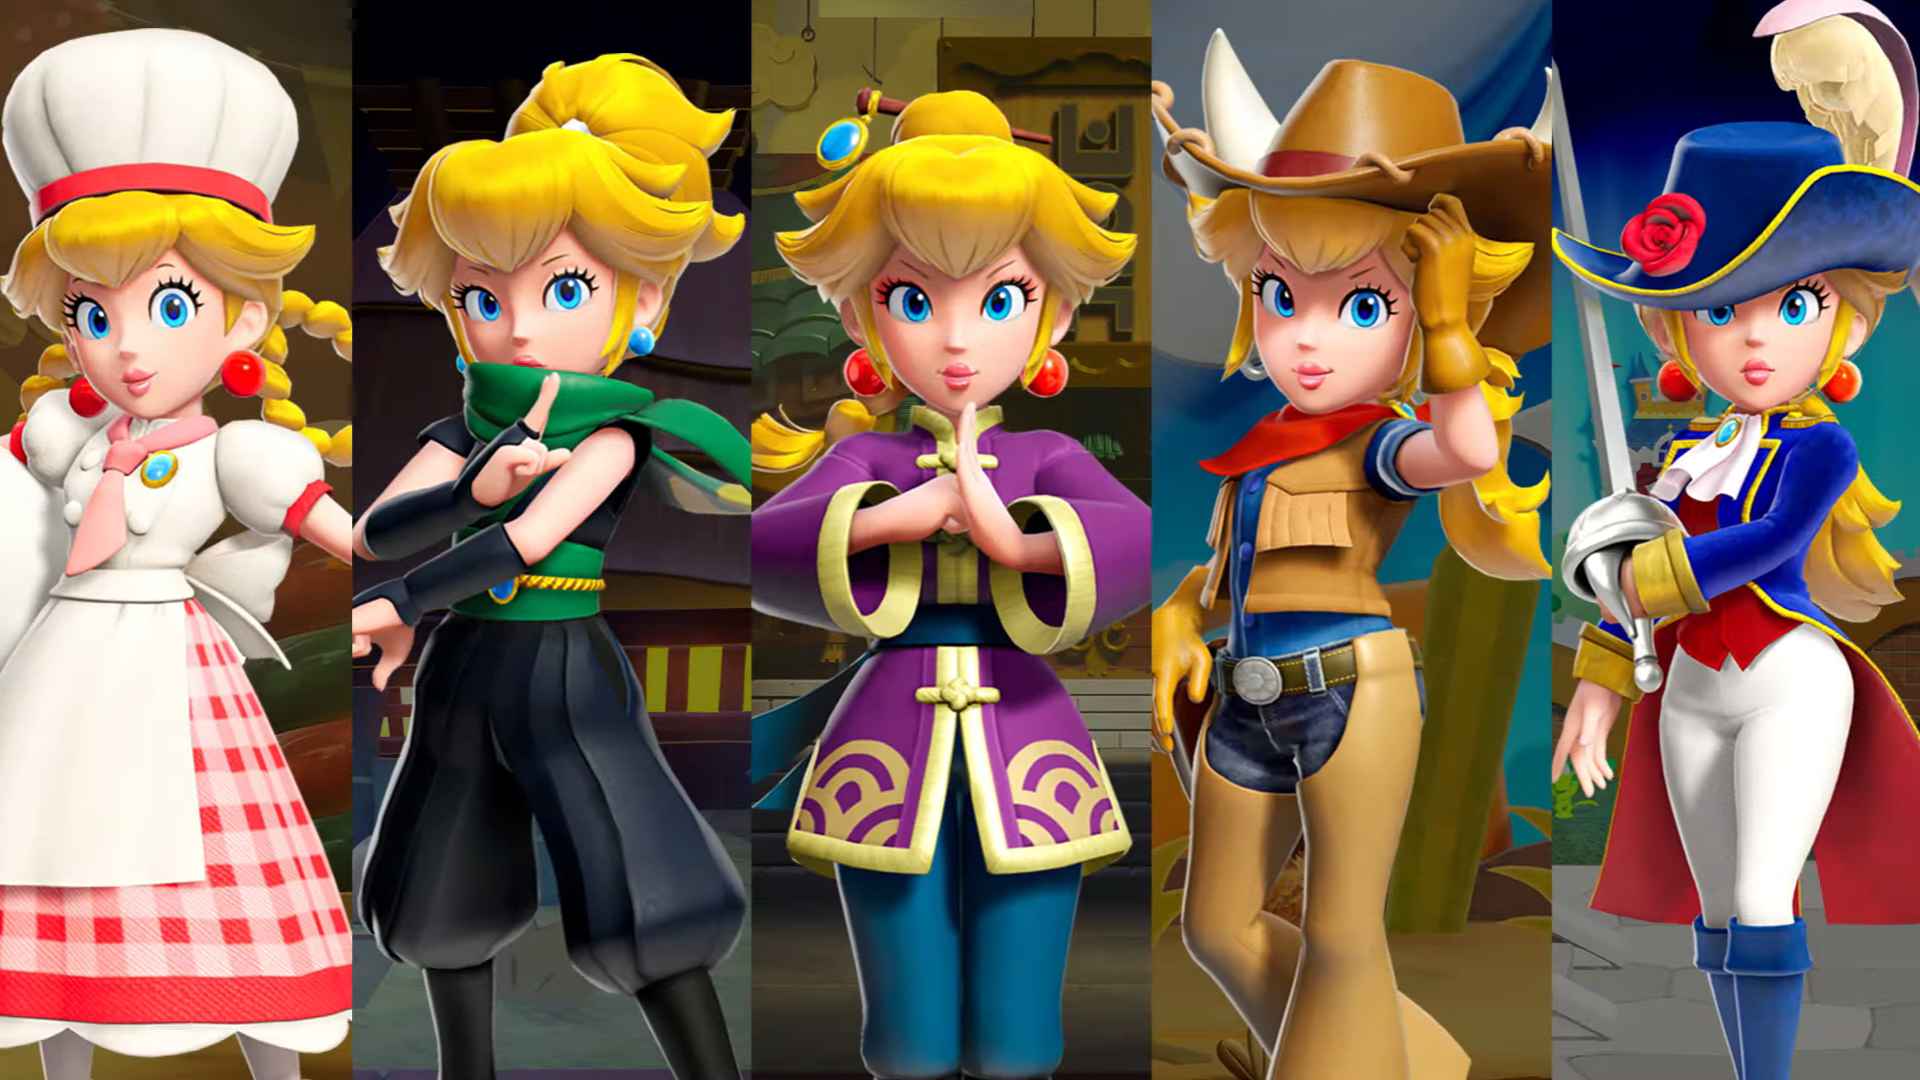 Princess Peach: Showtime! Reveals New Trailer Showcasing Transformations, Including Ninja and Cowgirl